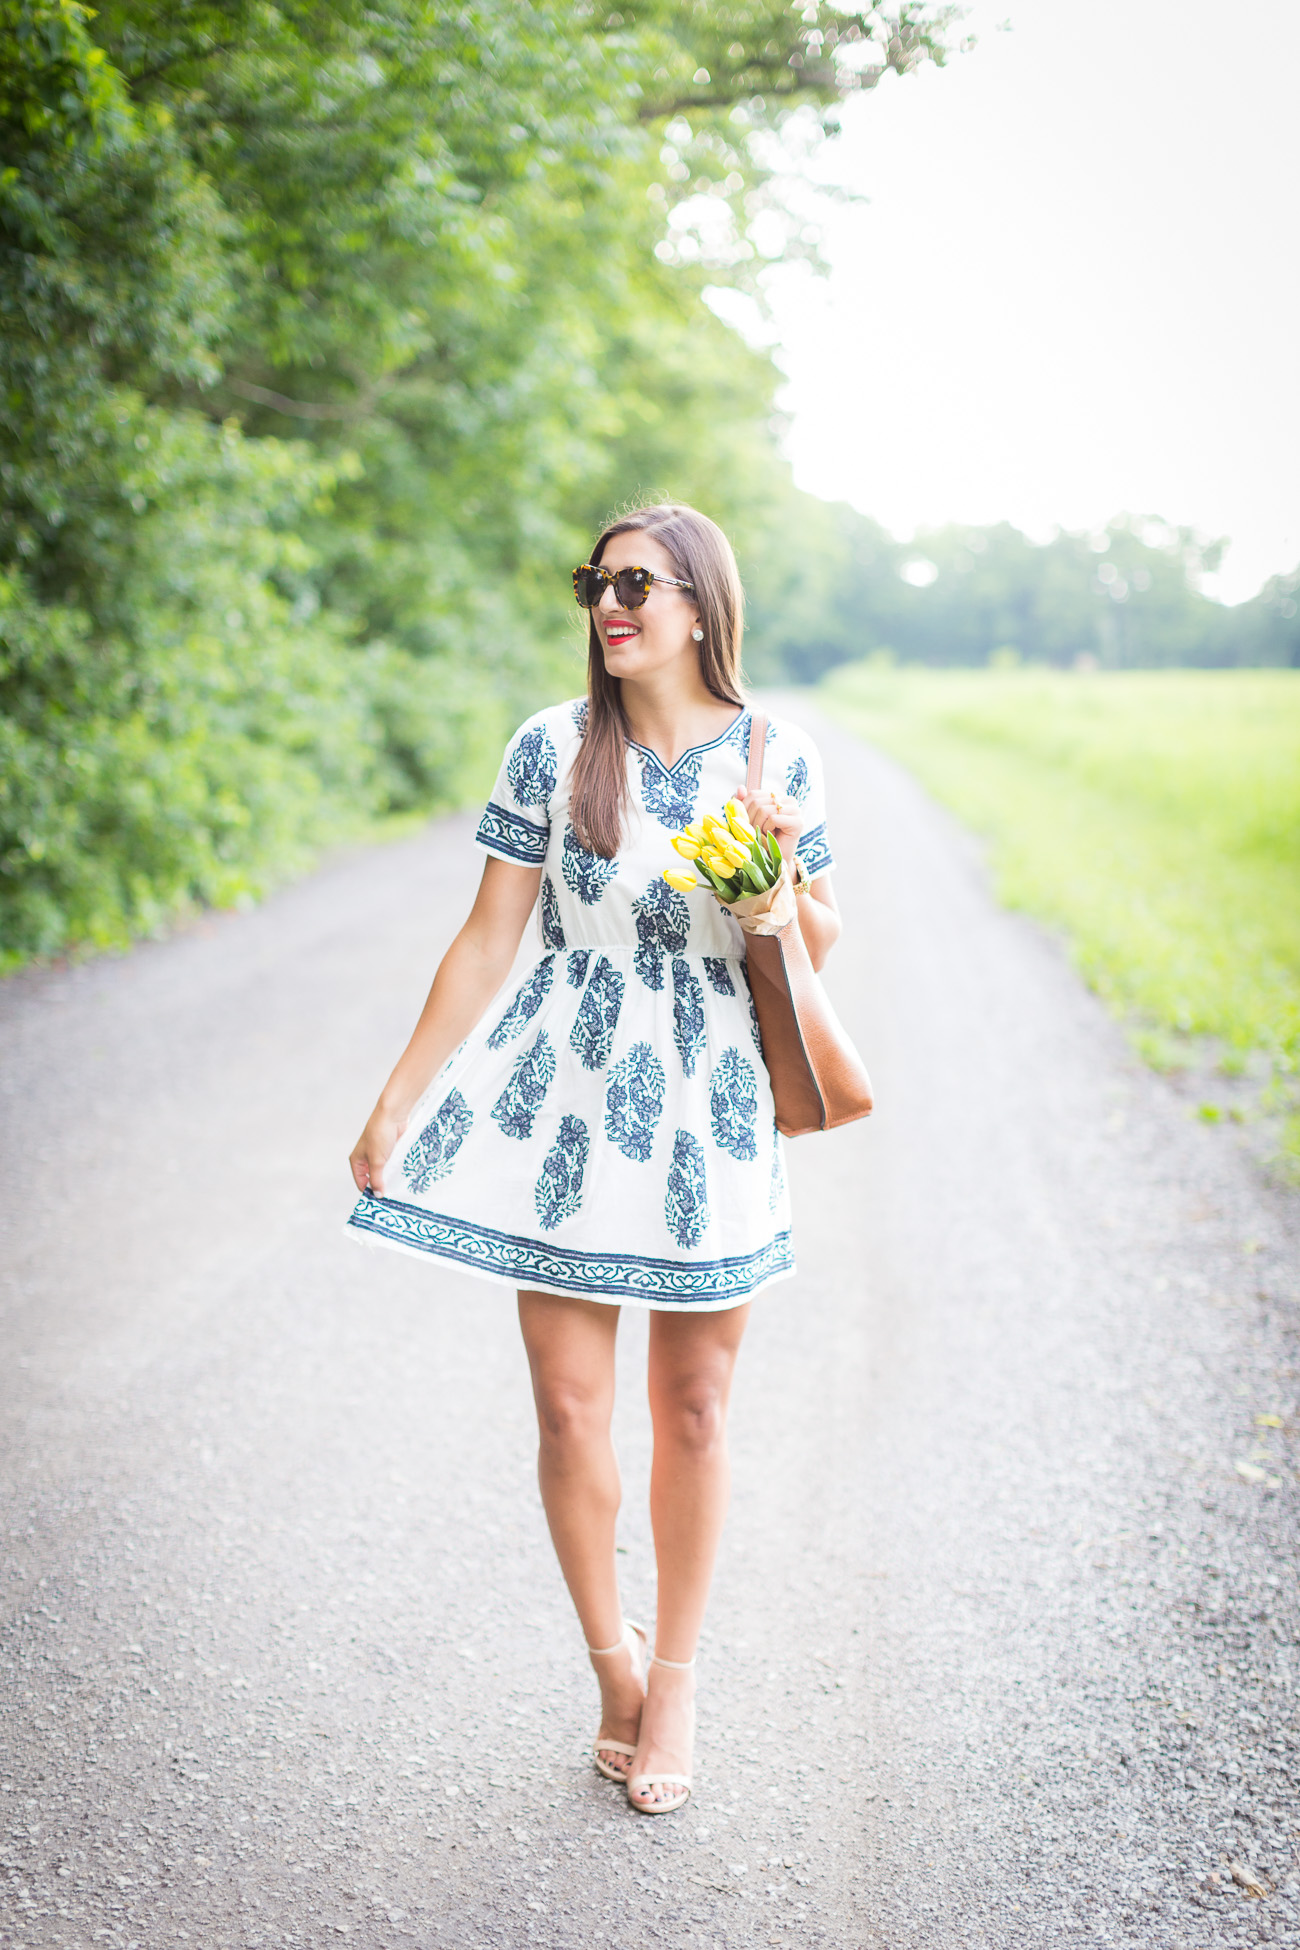 Fourth of July Outfit Inspiration // Grace Wainwright from A Southern Drawl